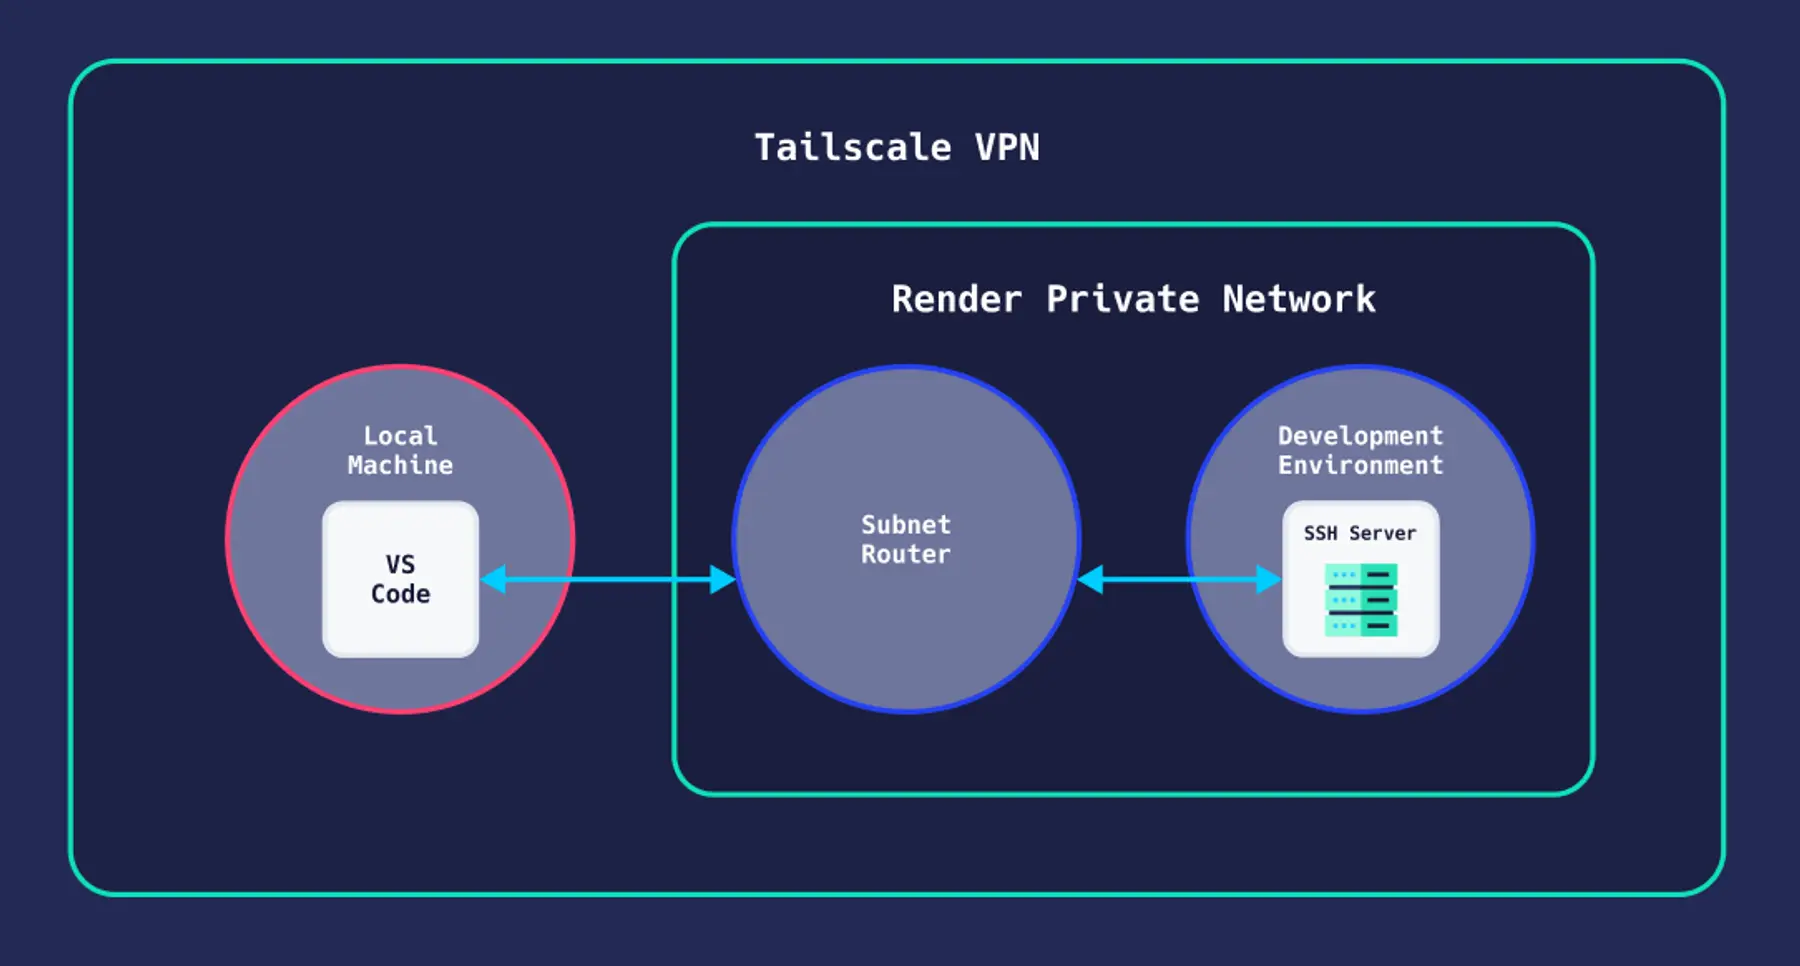 VS Code connects to the SSH server via a Tailscale subnet router